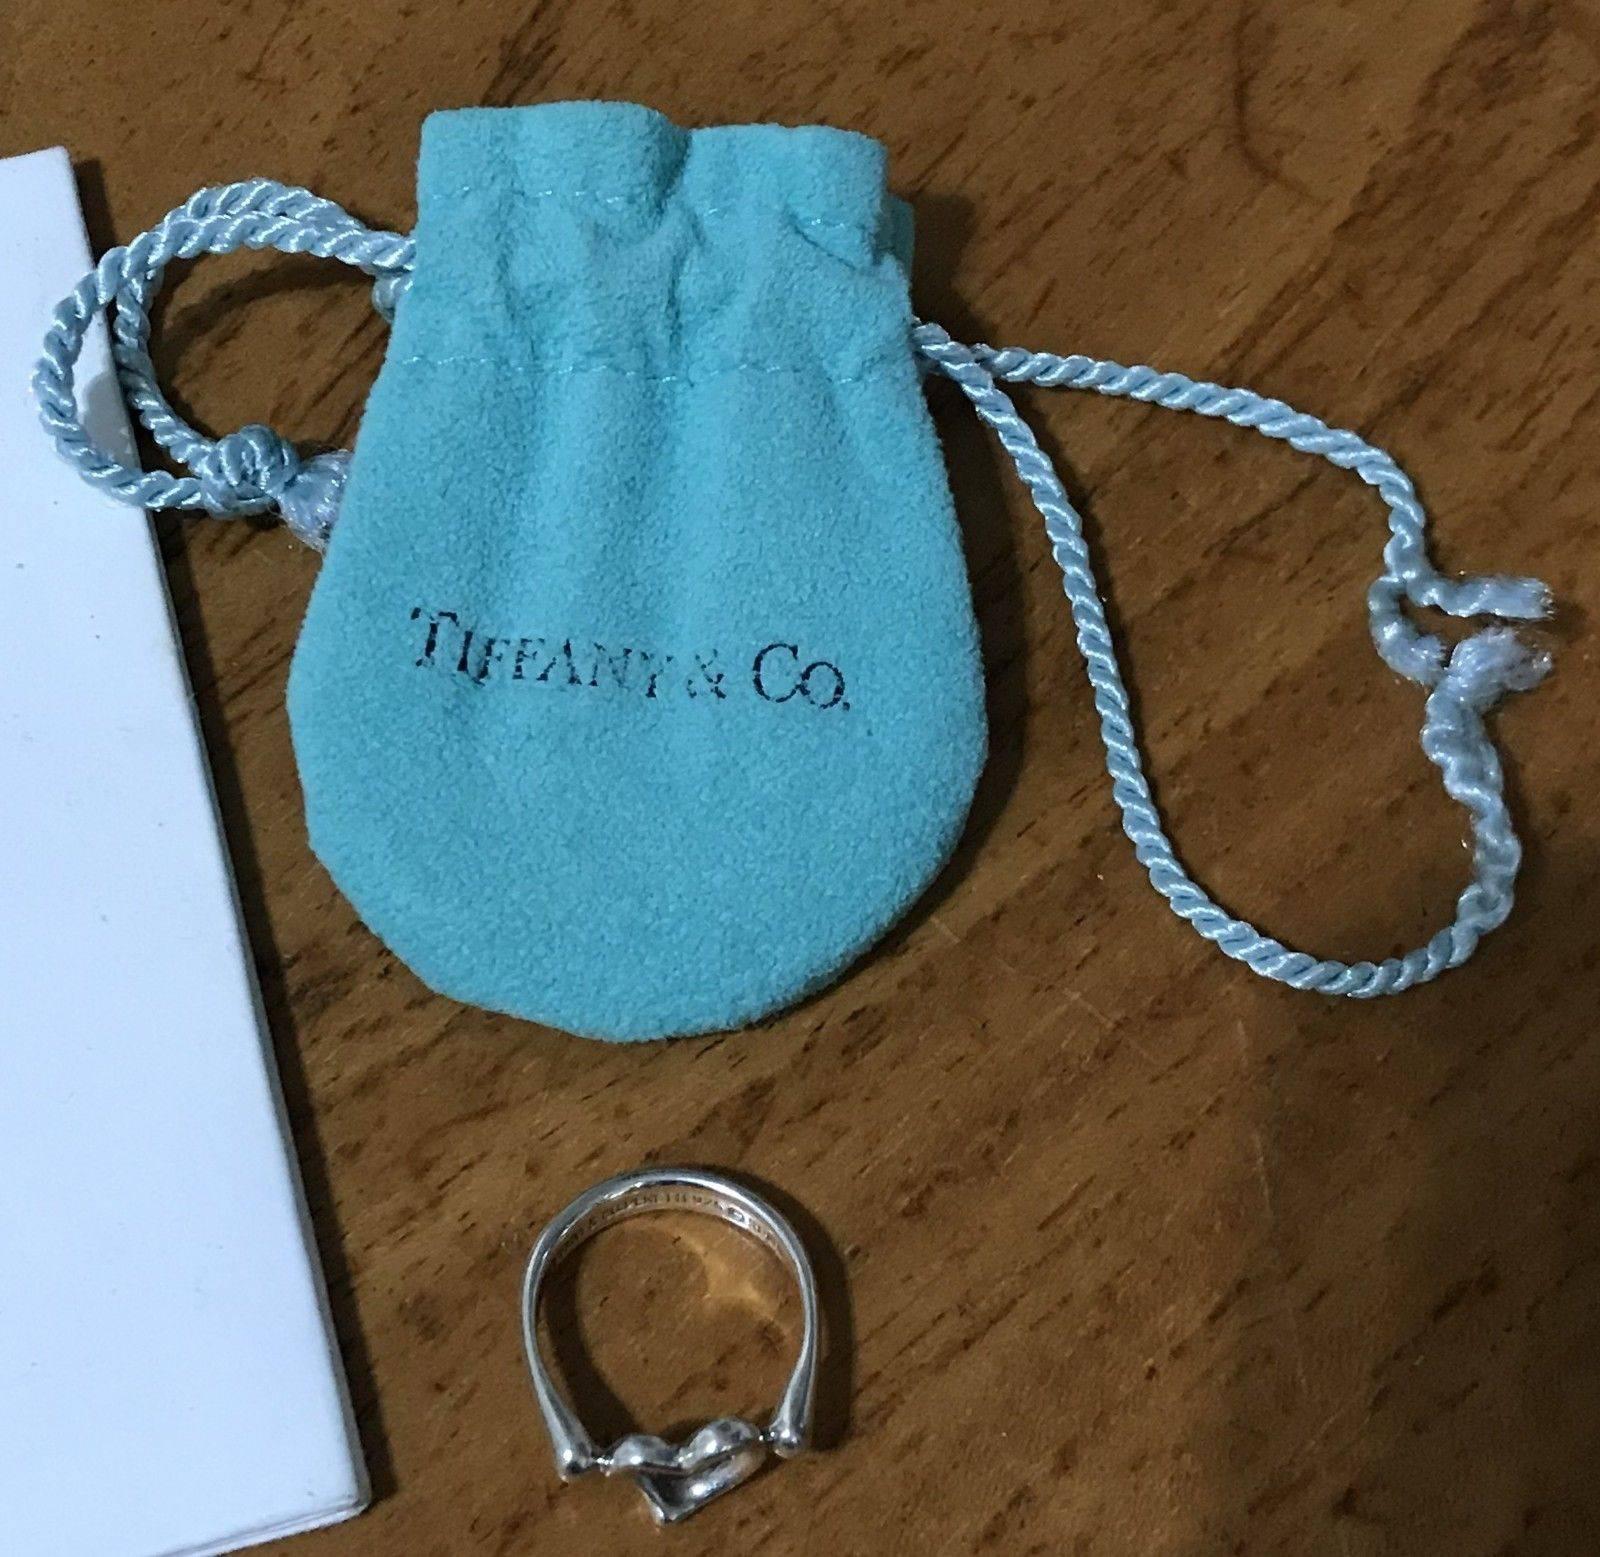 We are delighted to offer for sale for stunning Tiffany & Co Peretti open heart ring in sterling silver.

The ring is still for sale in Tiffany, it's fully hallmarked on the inside with the Tiffany & co stamp and Peretti’s name

The ring is UK